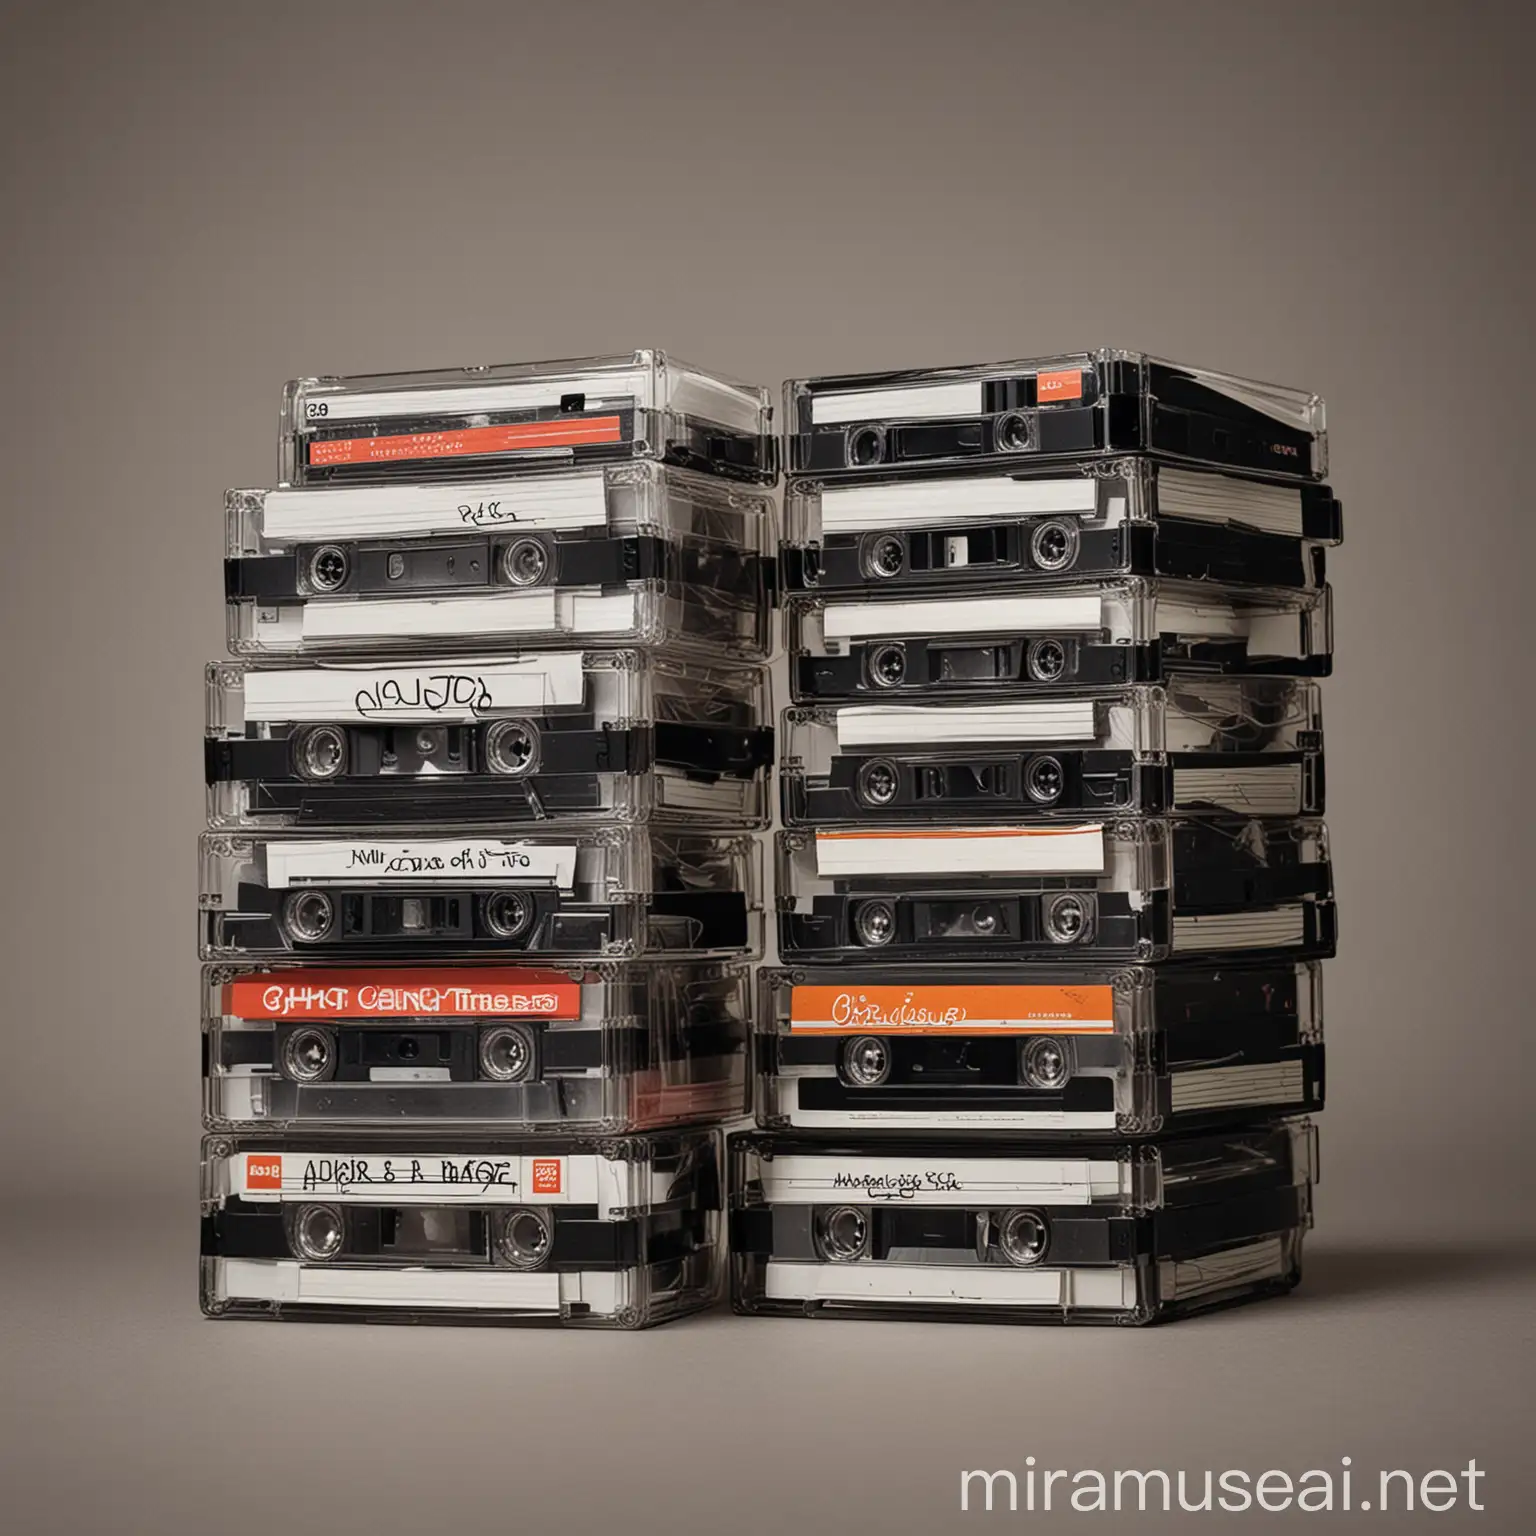 a stack of 9 cassette tapes